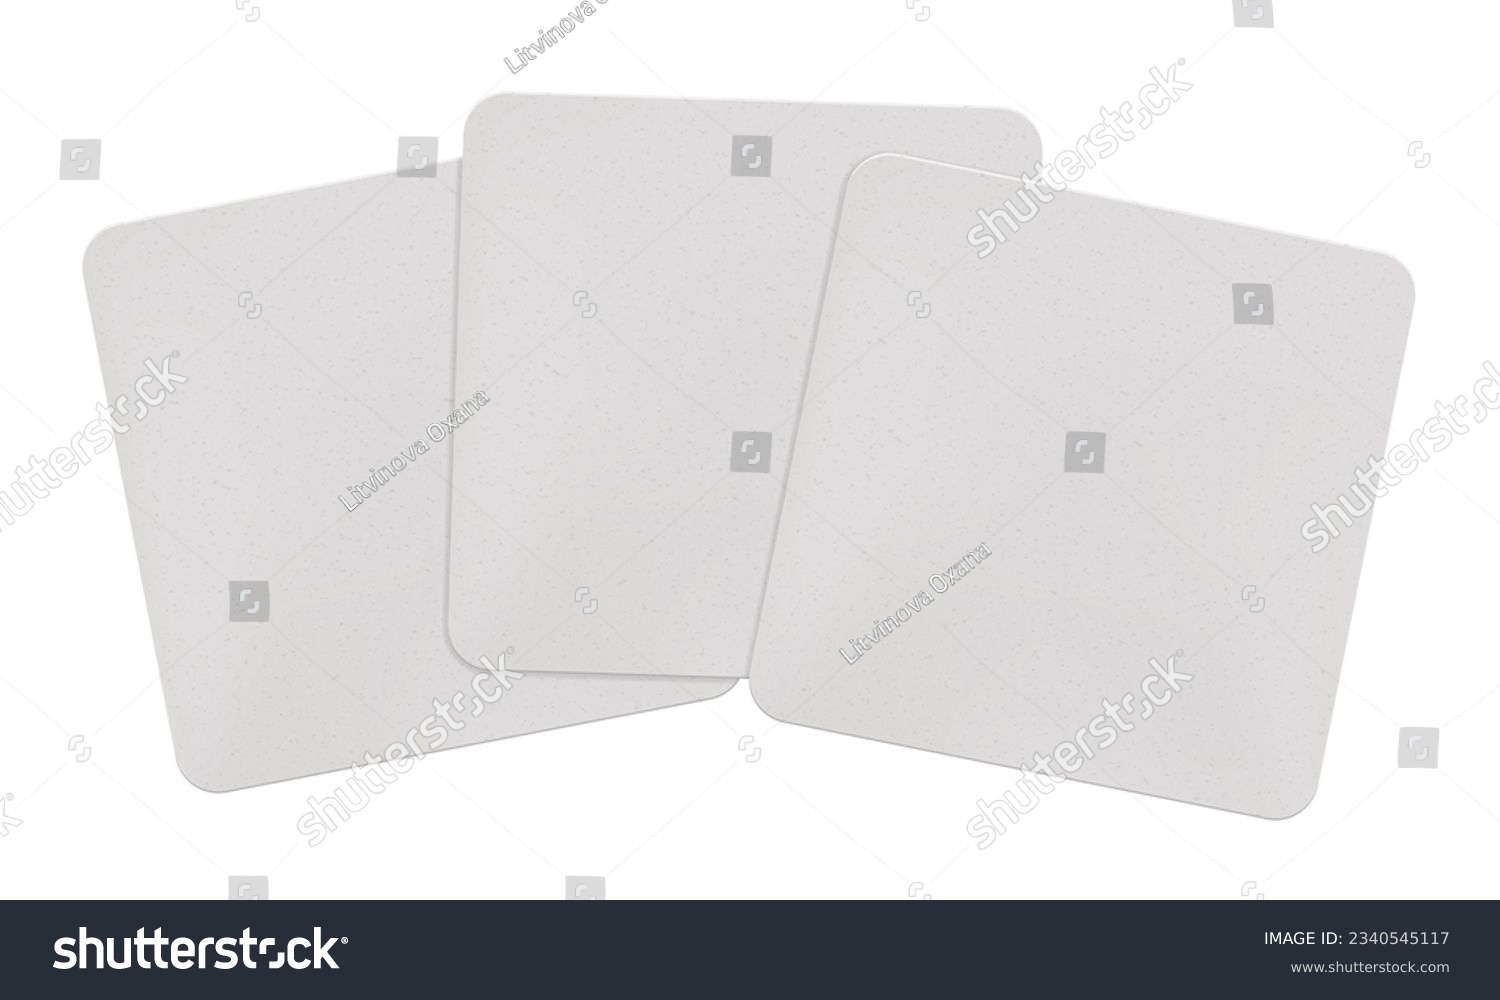 SVG of A stack of three white square beer coasters mockup. Blank sample bierdeckels with rounded corners isolated from the background. Cardboard pieces for branding to put under a hot cup or a wet glass. svg